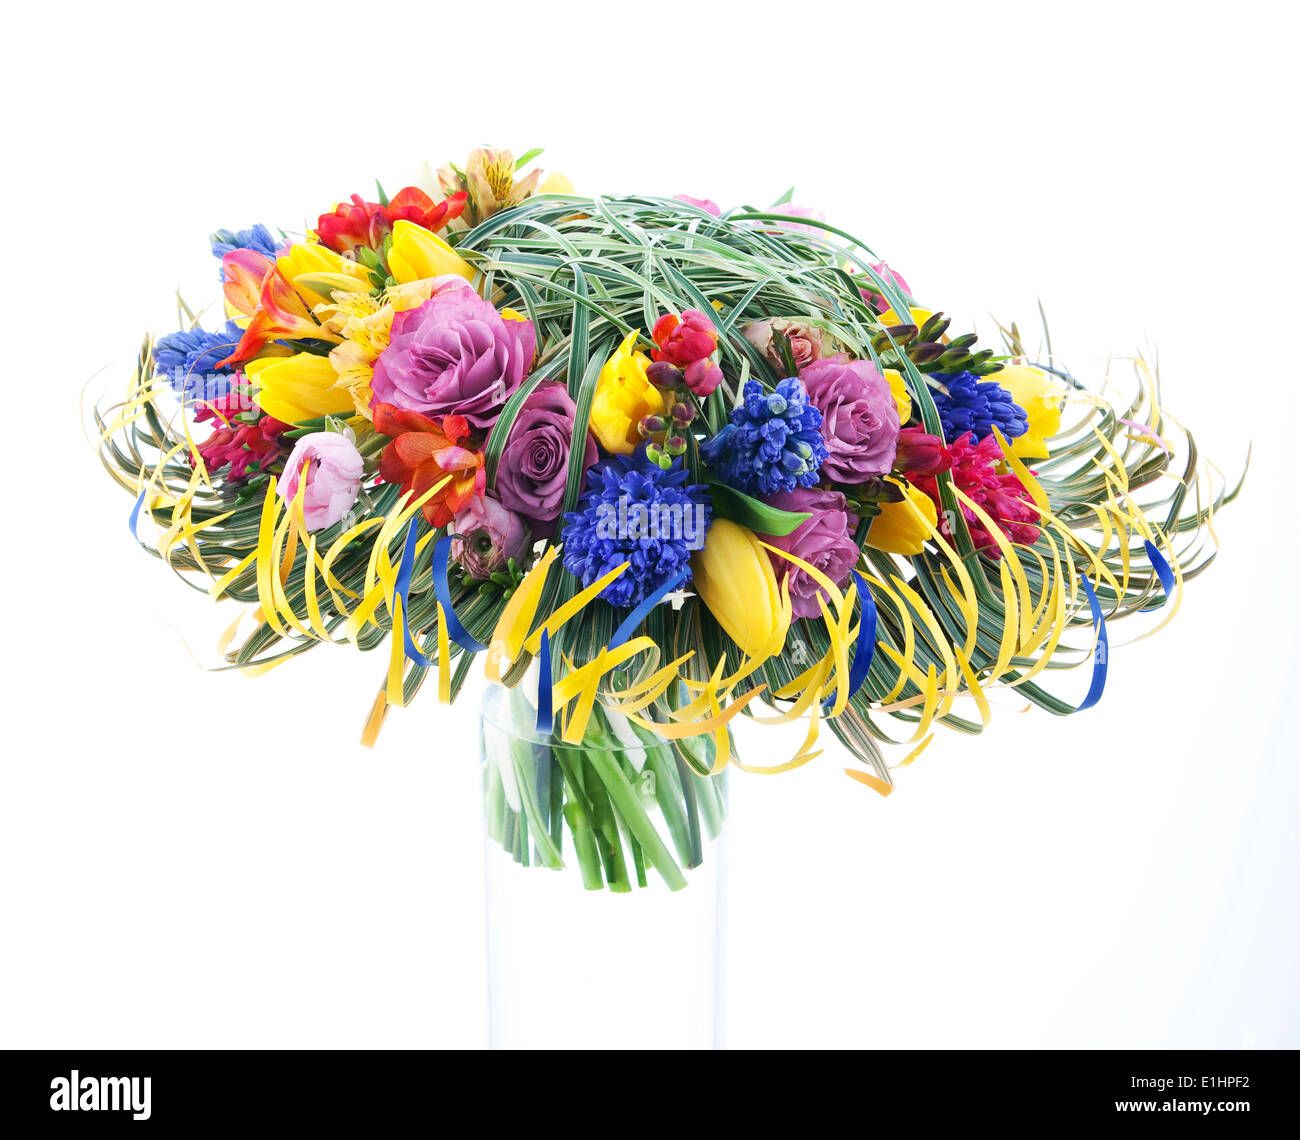 Floristics - colorful festive bouquet of flowers isolated on white background Stock Photo